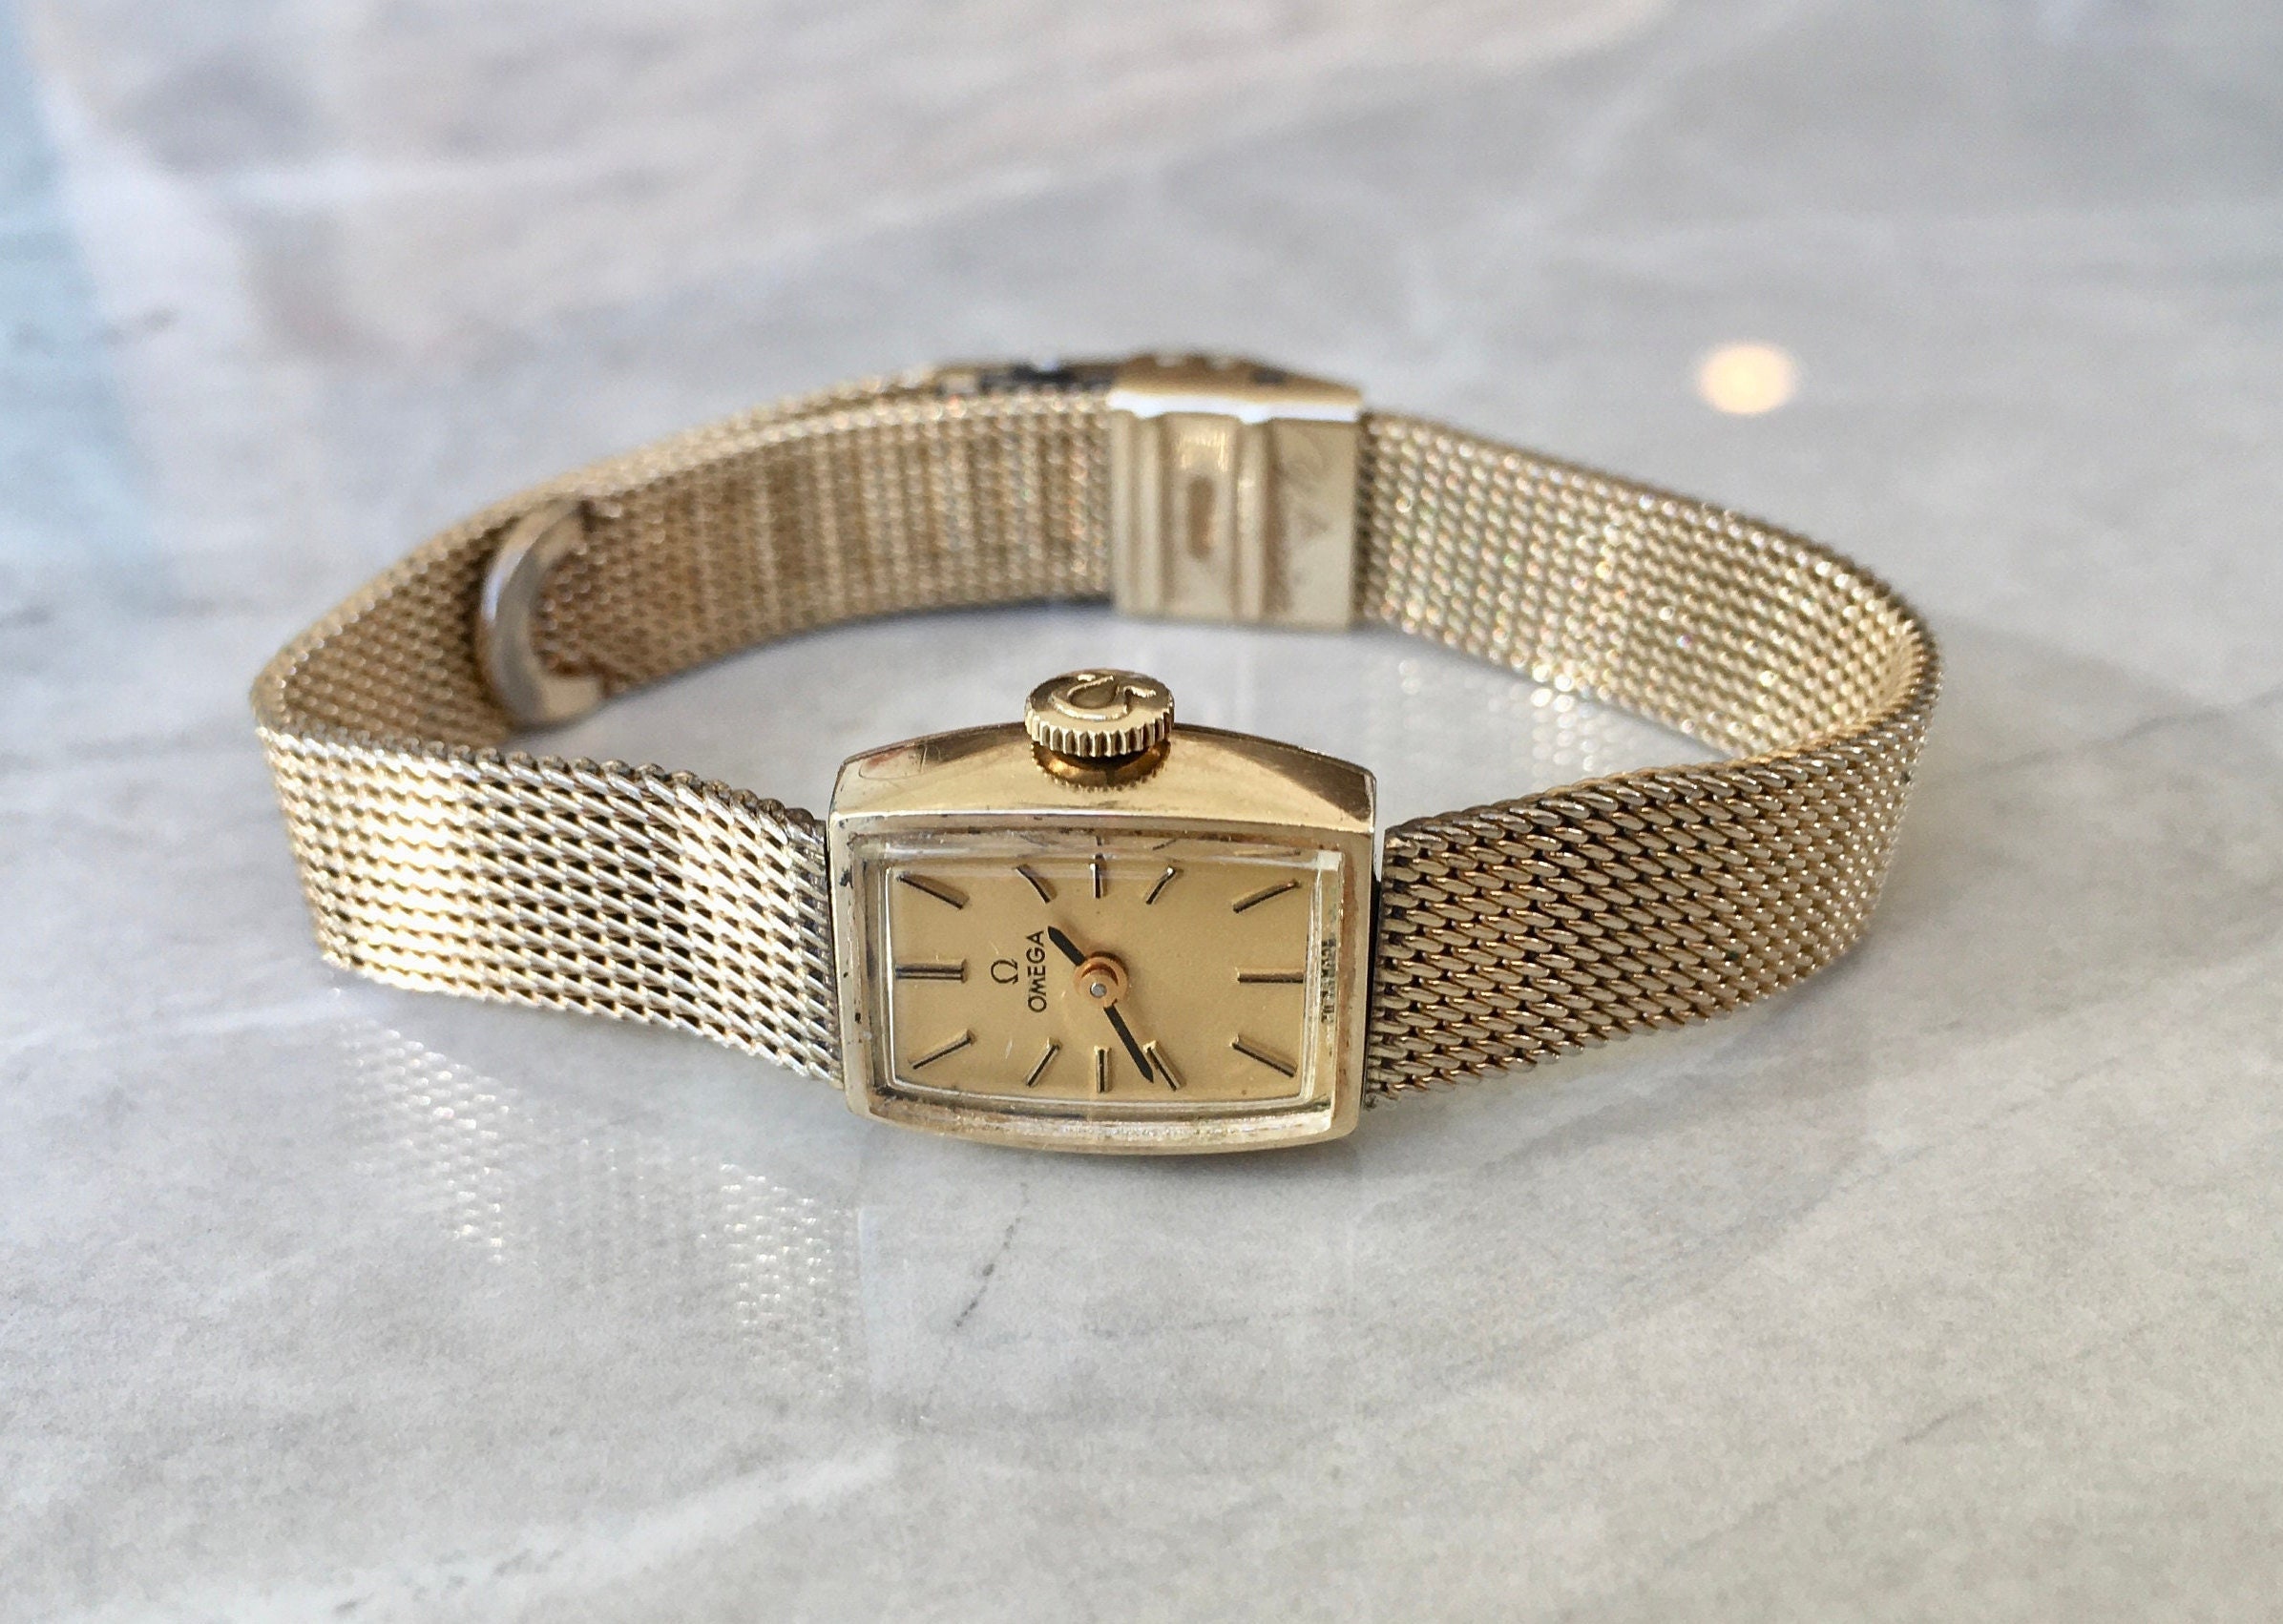 Top more than 151 omega gold bracelet watch